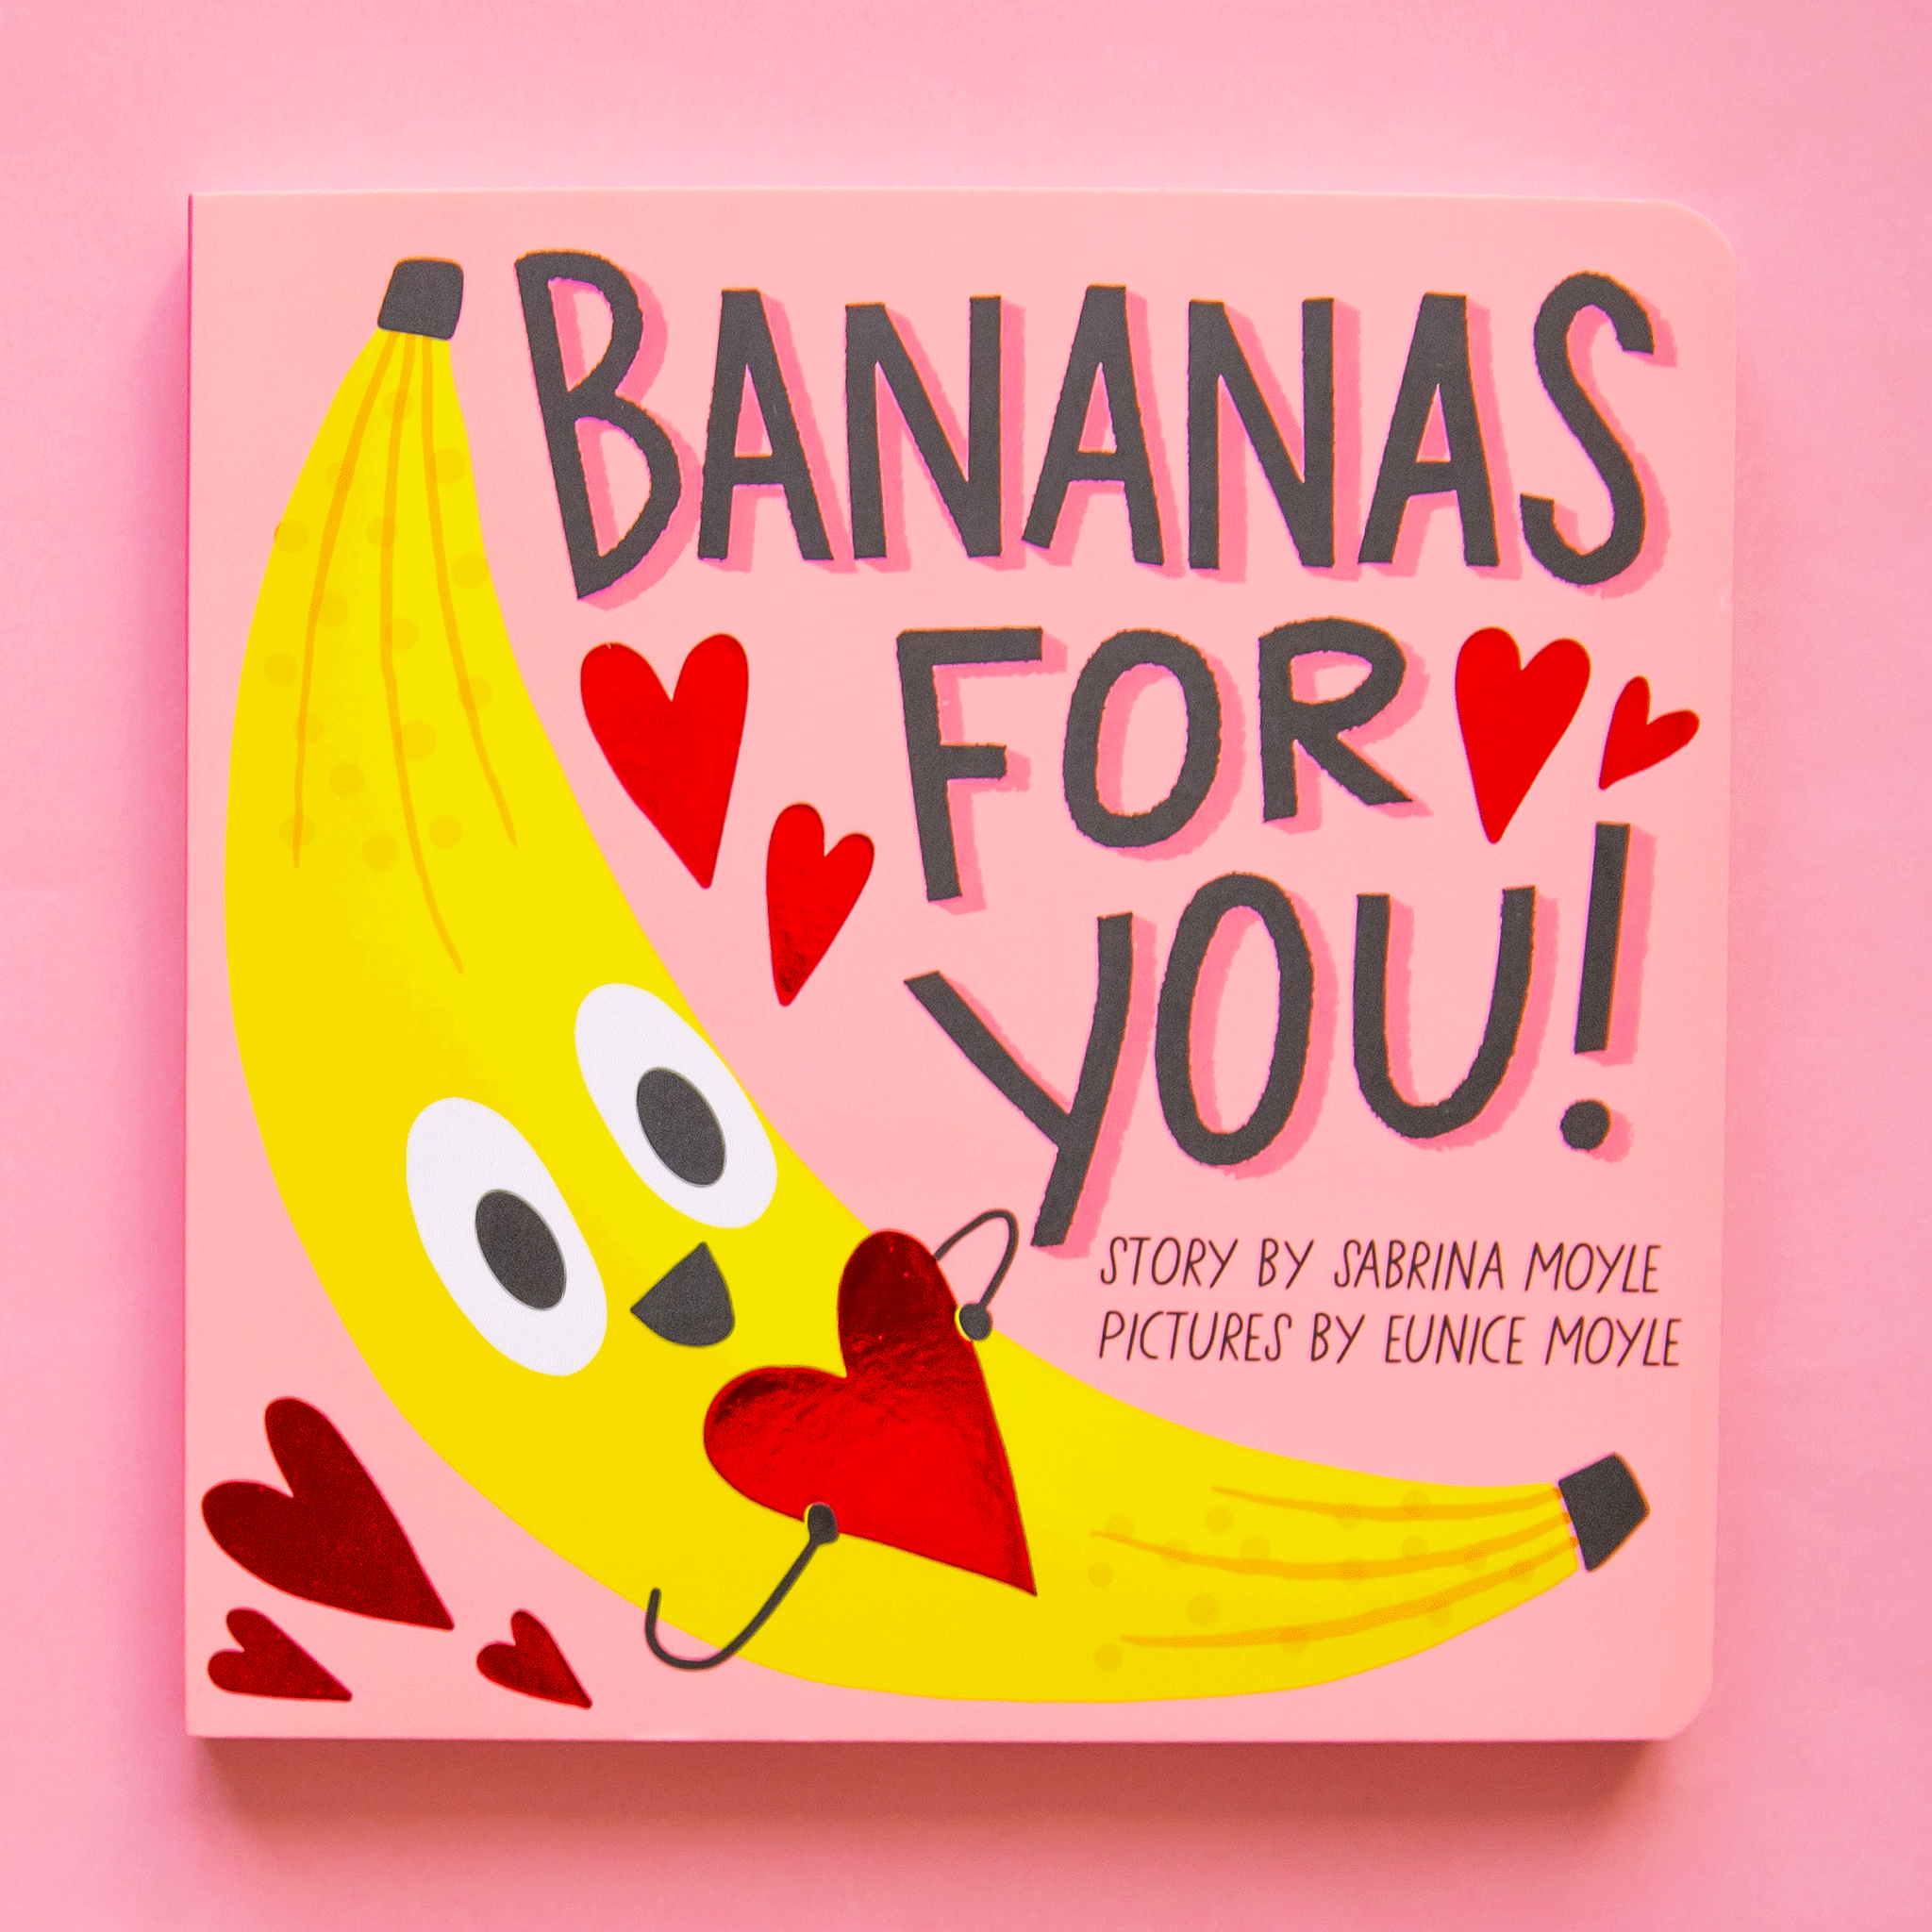 On a pink background is a pink book cover with a banana on the front holding a heart and title that reads, "Bananas For You". 